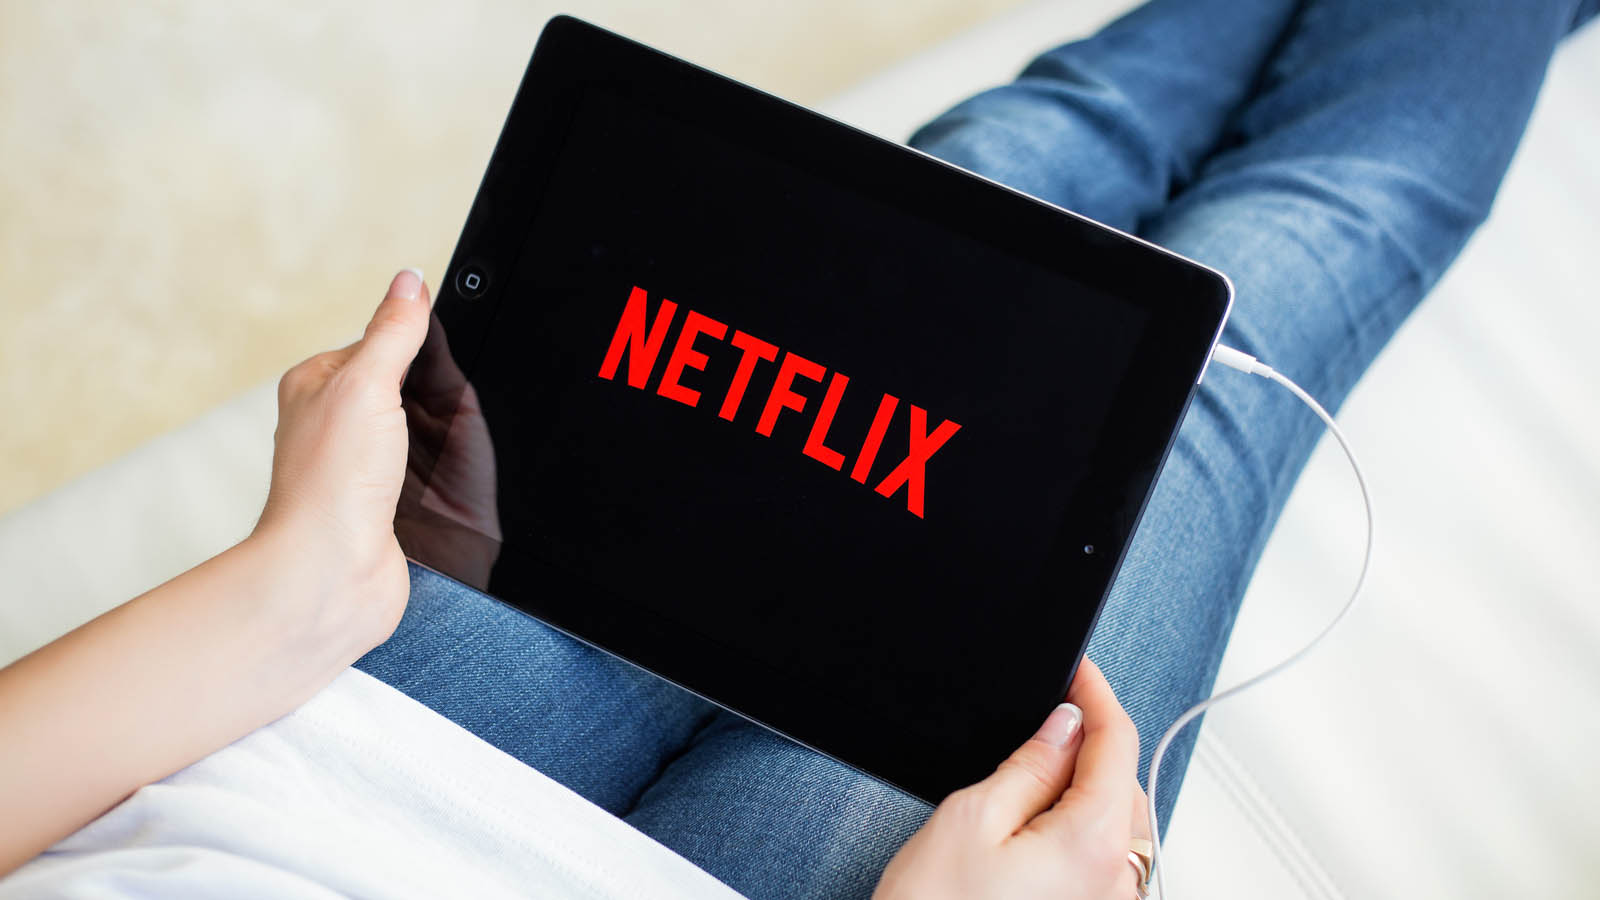 NFLX Stock. the netflix logo displayed on a tablet that a person is holding while laying down